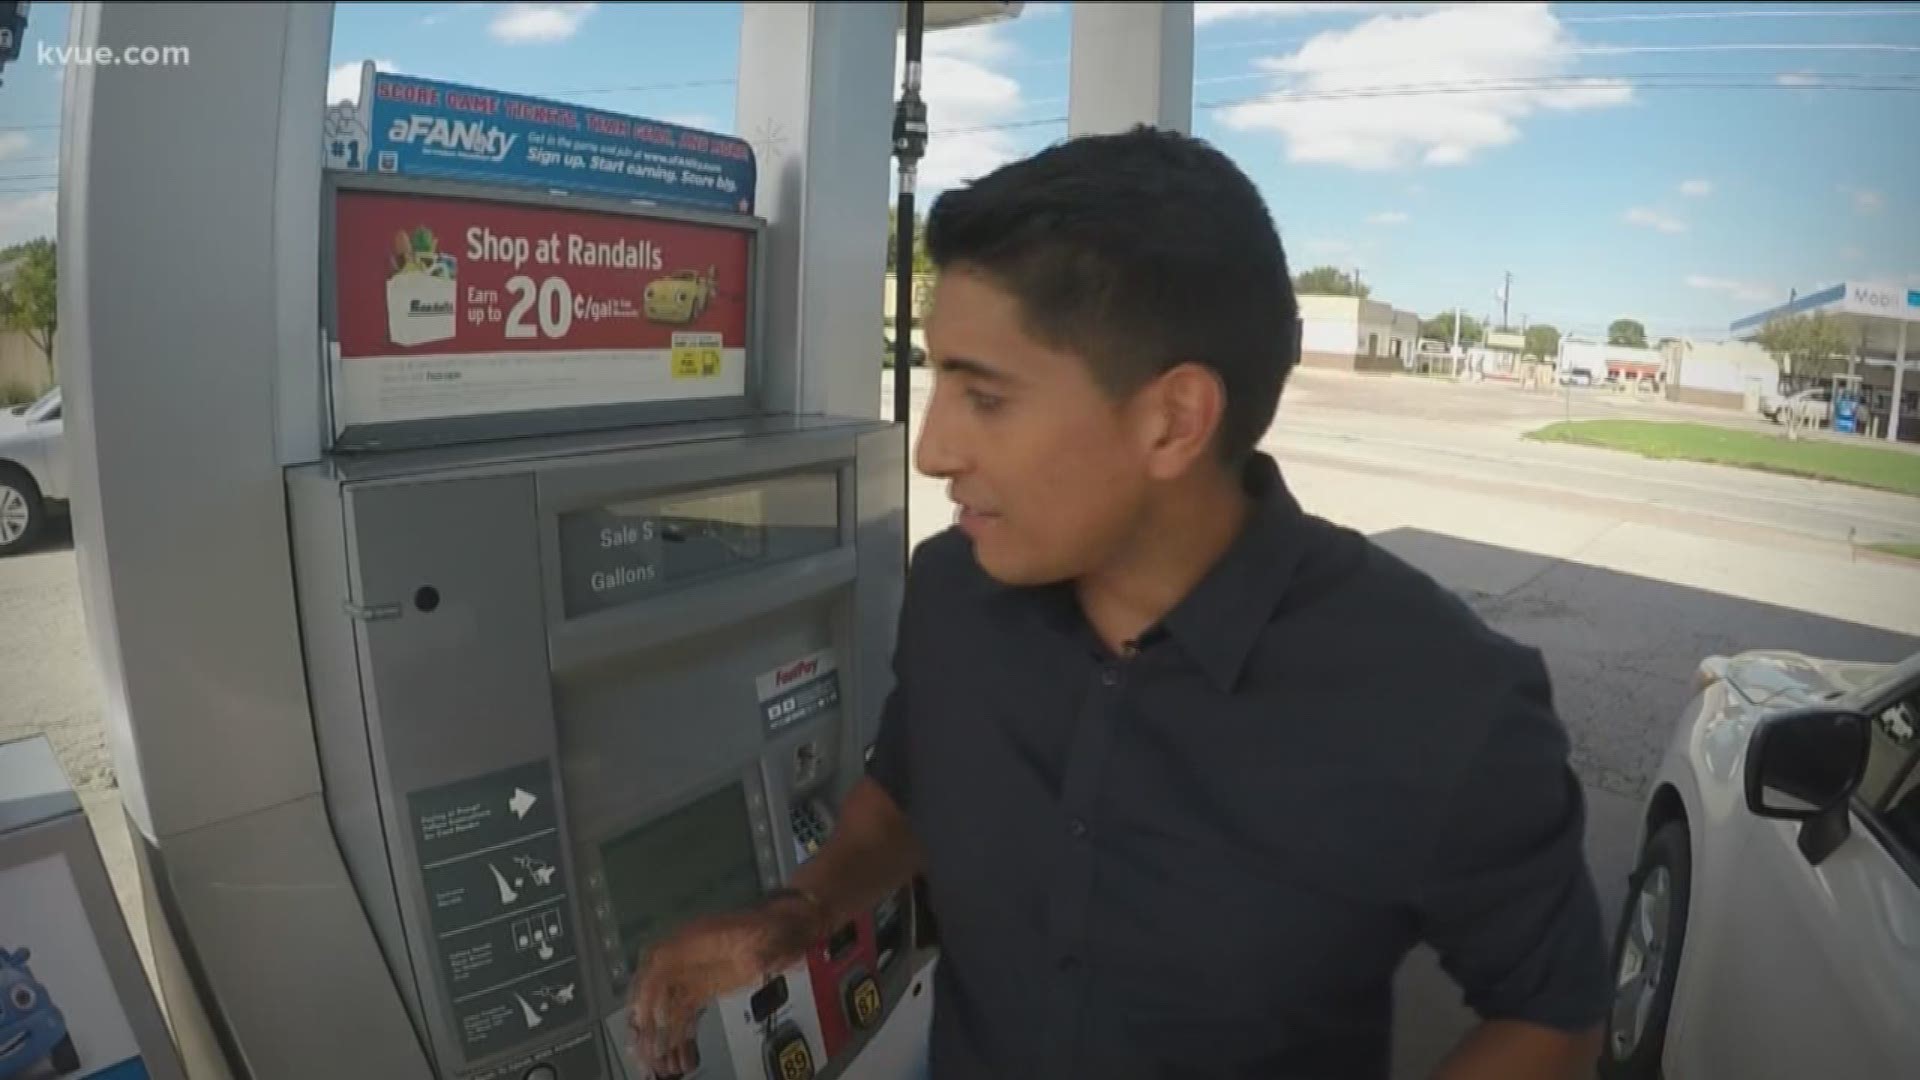 A Northwest Austin gas station has been dealing with a massive security problem within the last month: an abundance of credit card skimmers have been found at their location, according to the Texas Department of Agriculture.